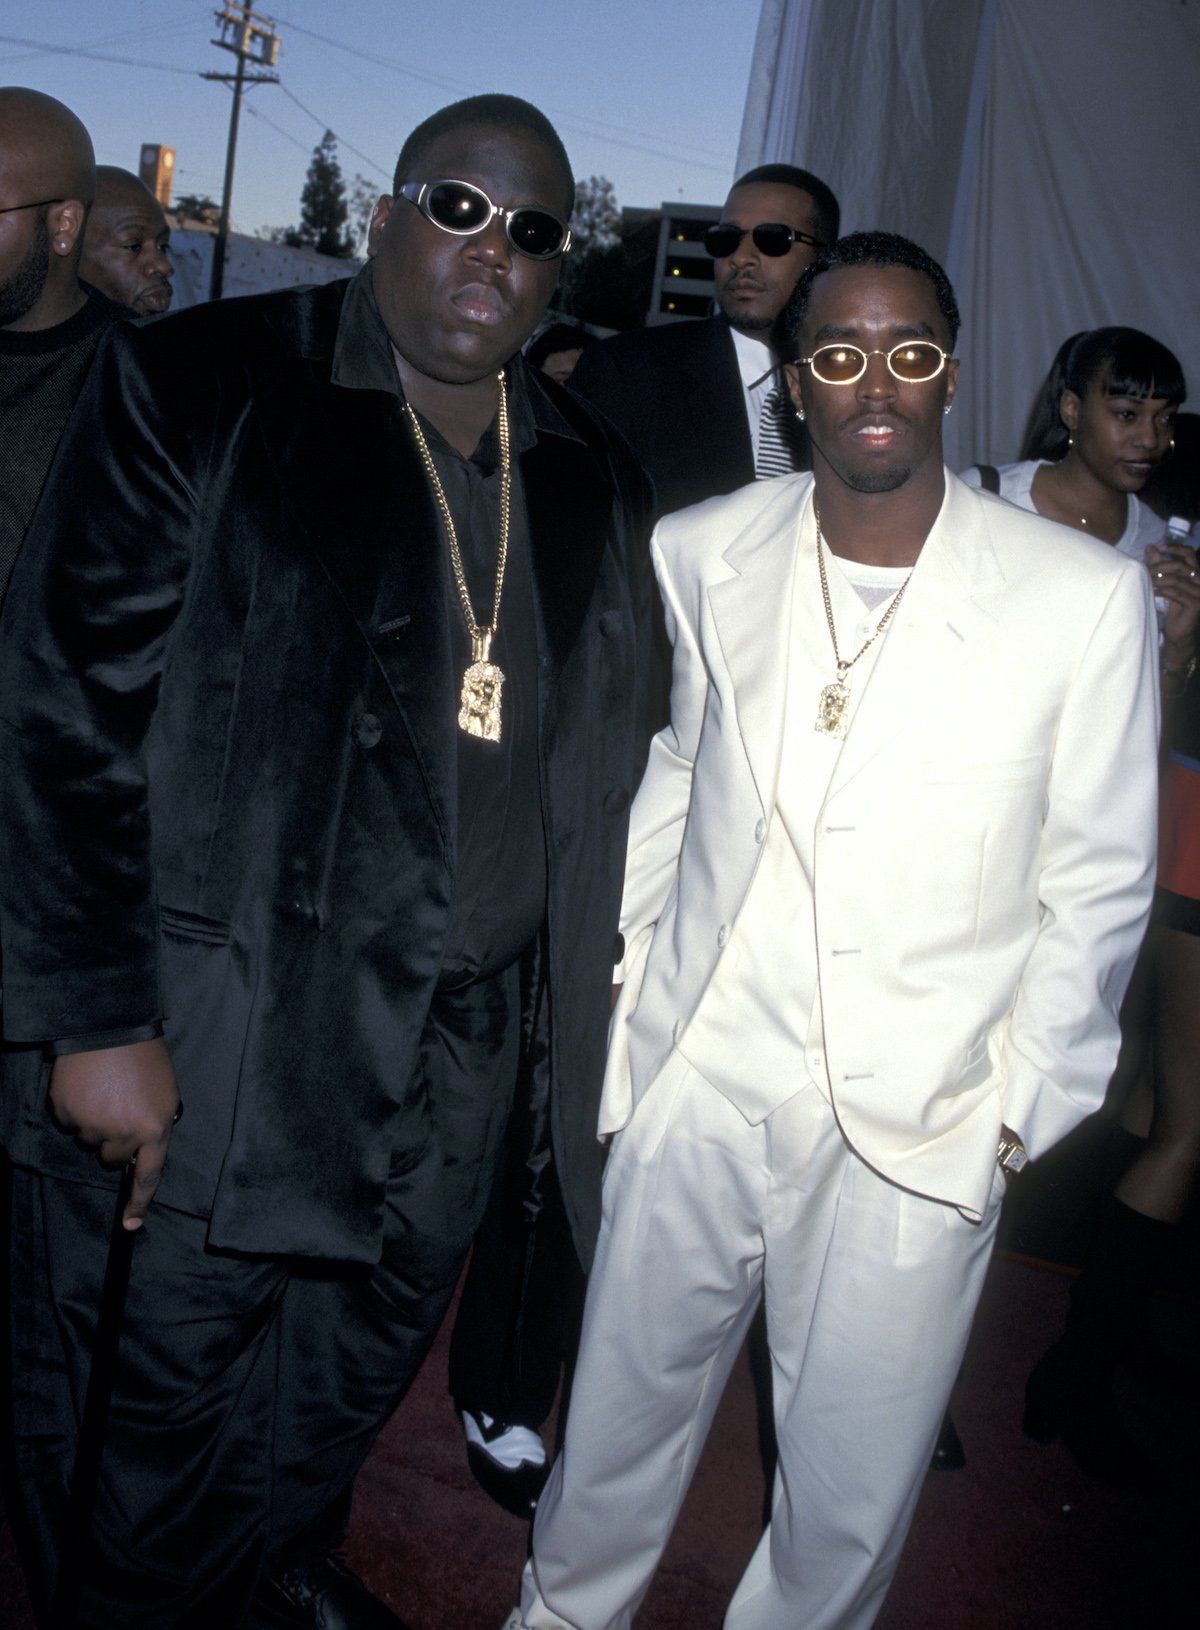 Christopher "The Notorious B.I.G." Wallace and Sean Combs